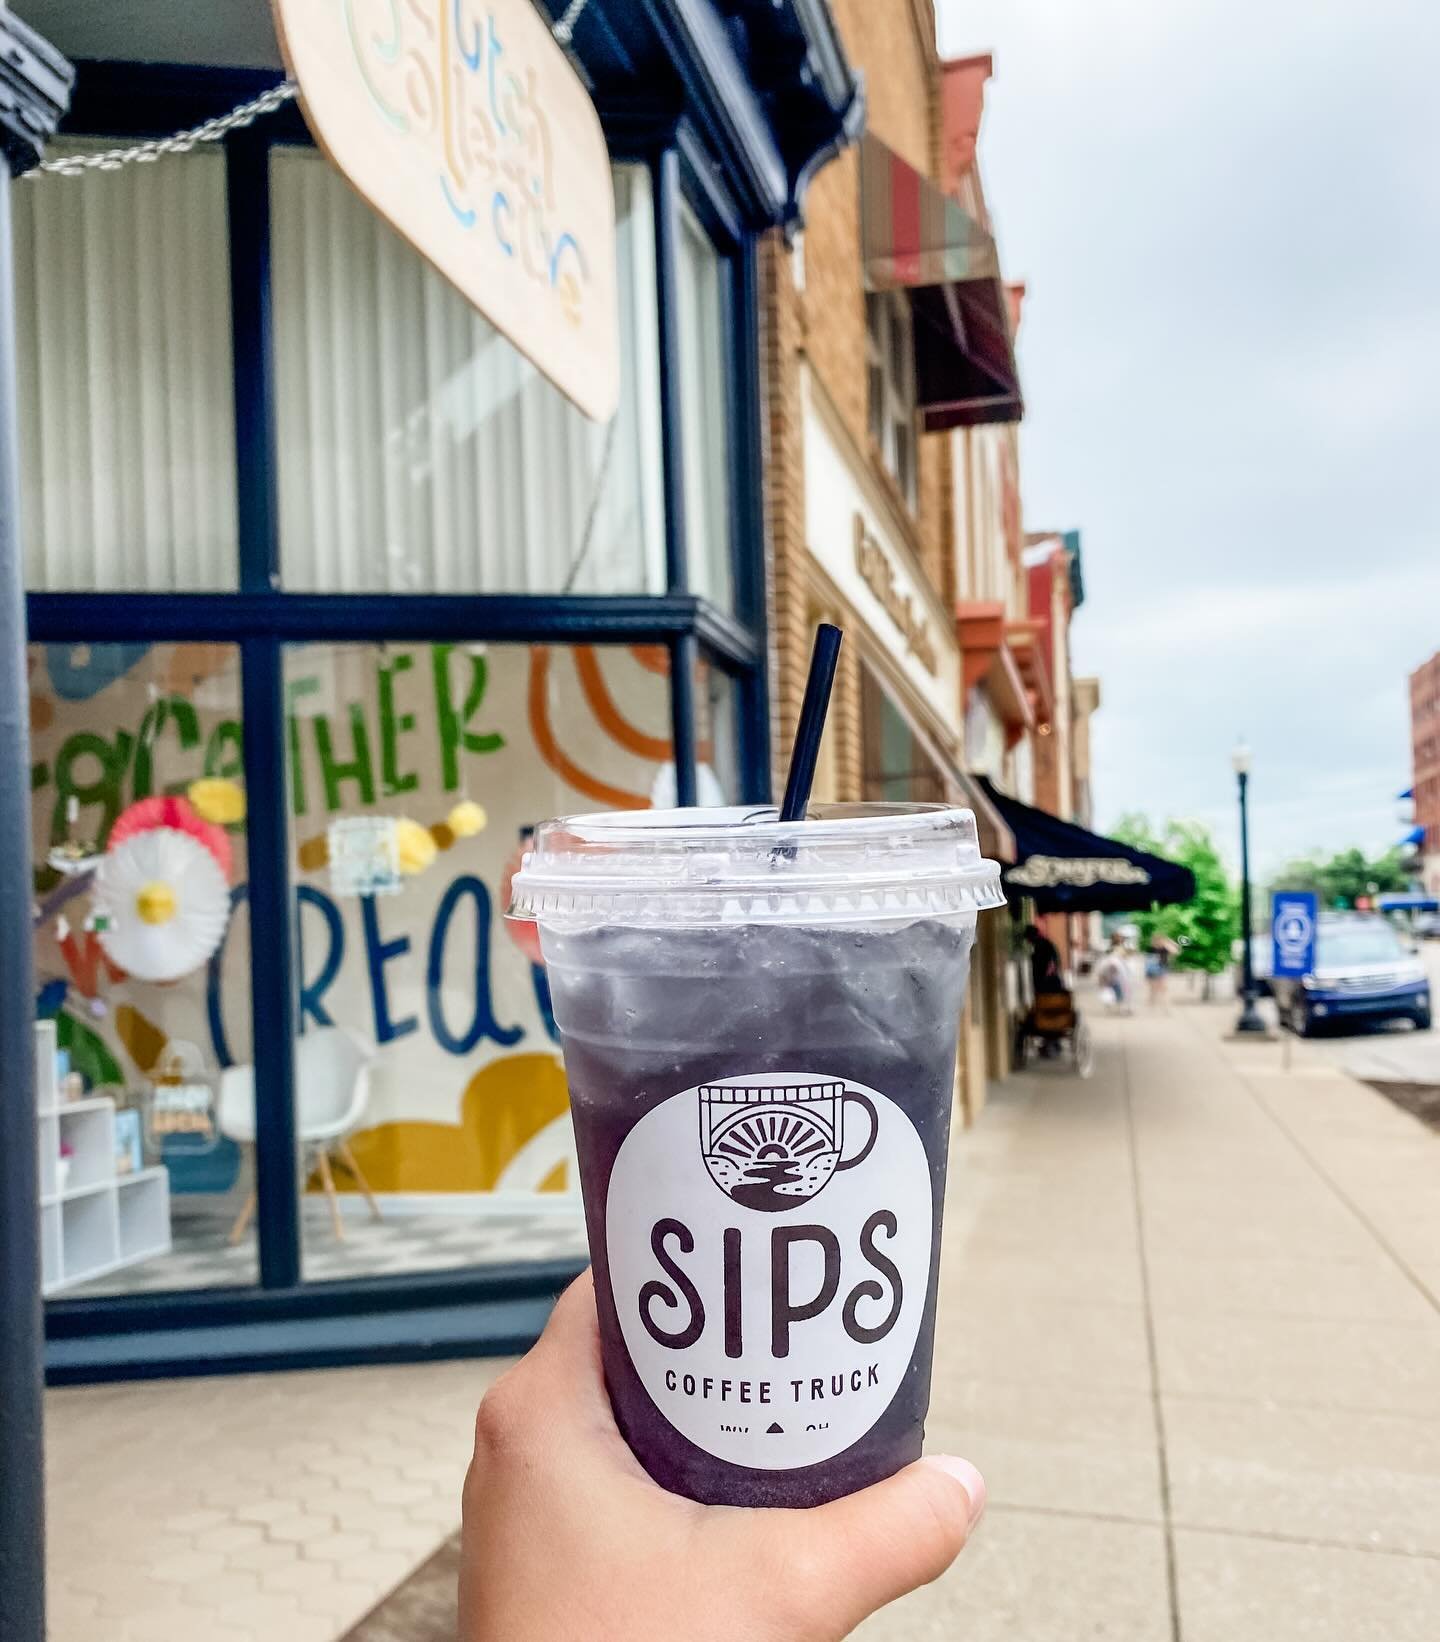 Happy Monday! 🙌 Small Business Week may be over, but that&rsquo;s no reason to stop lovin&rsquo; on all your favorite local, small biz friends! Live every week like Small Biz Week 😎

🛸 We are loving The Space Fiend refresher from @sipscoffeetruck 